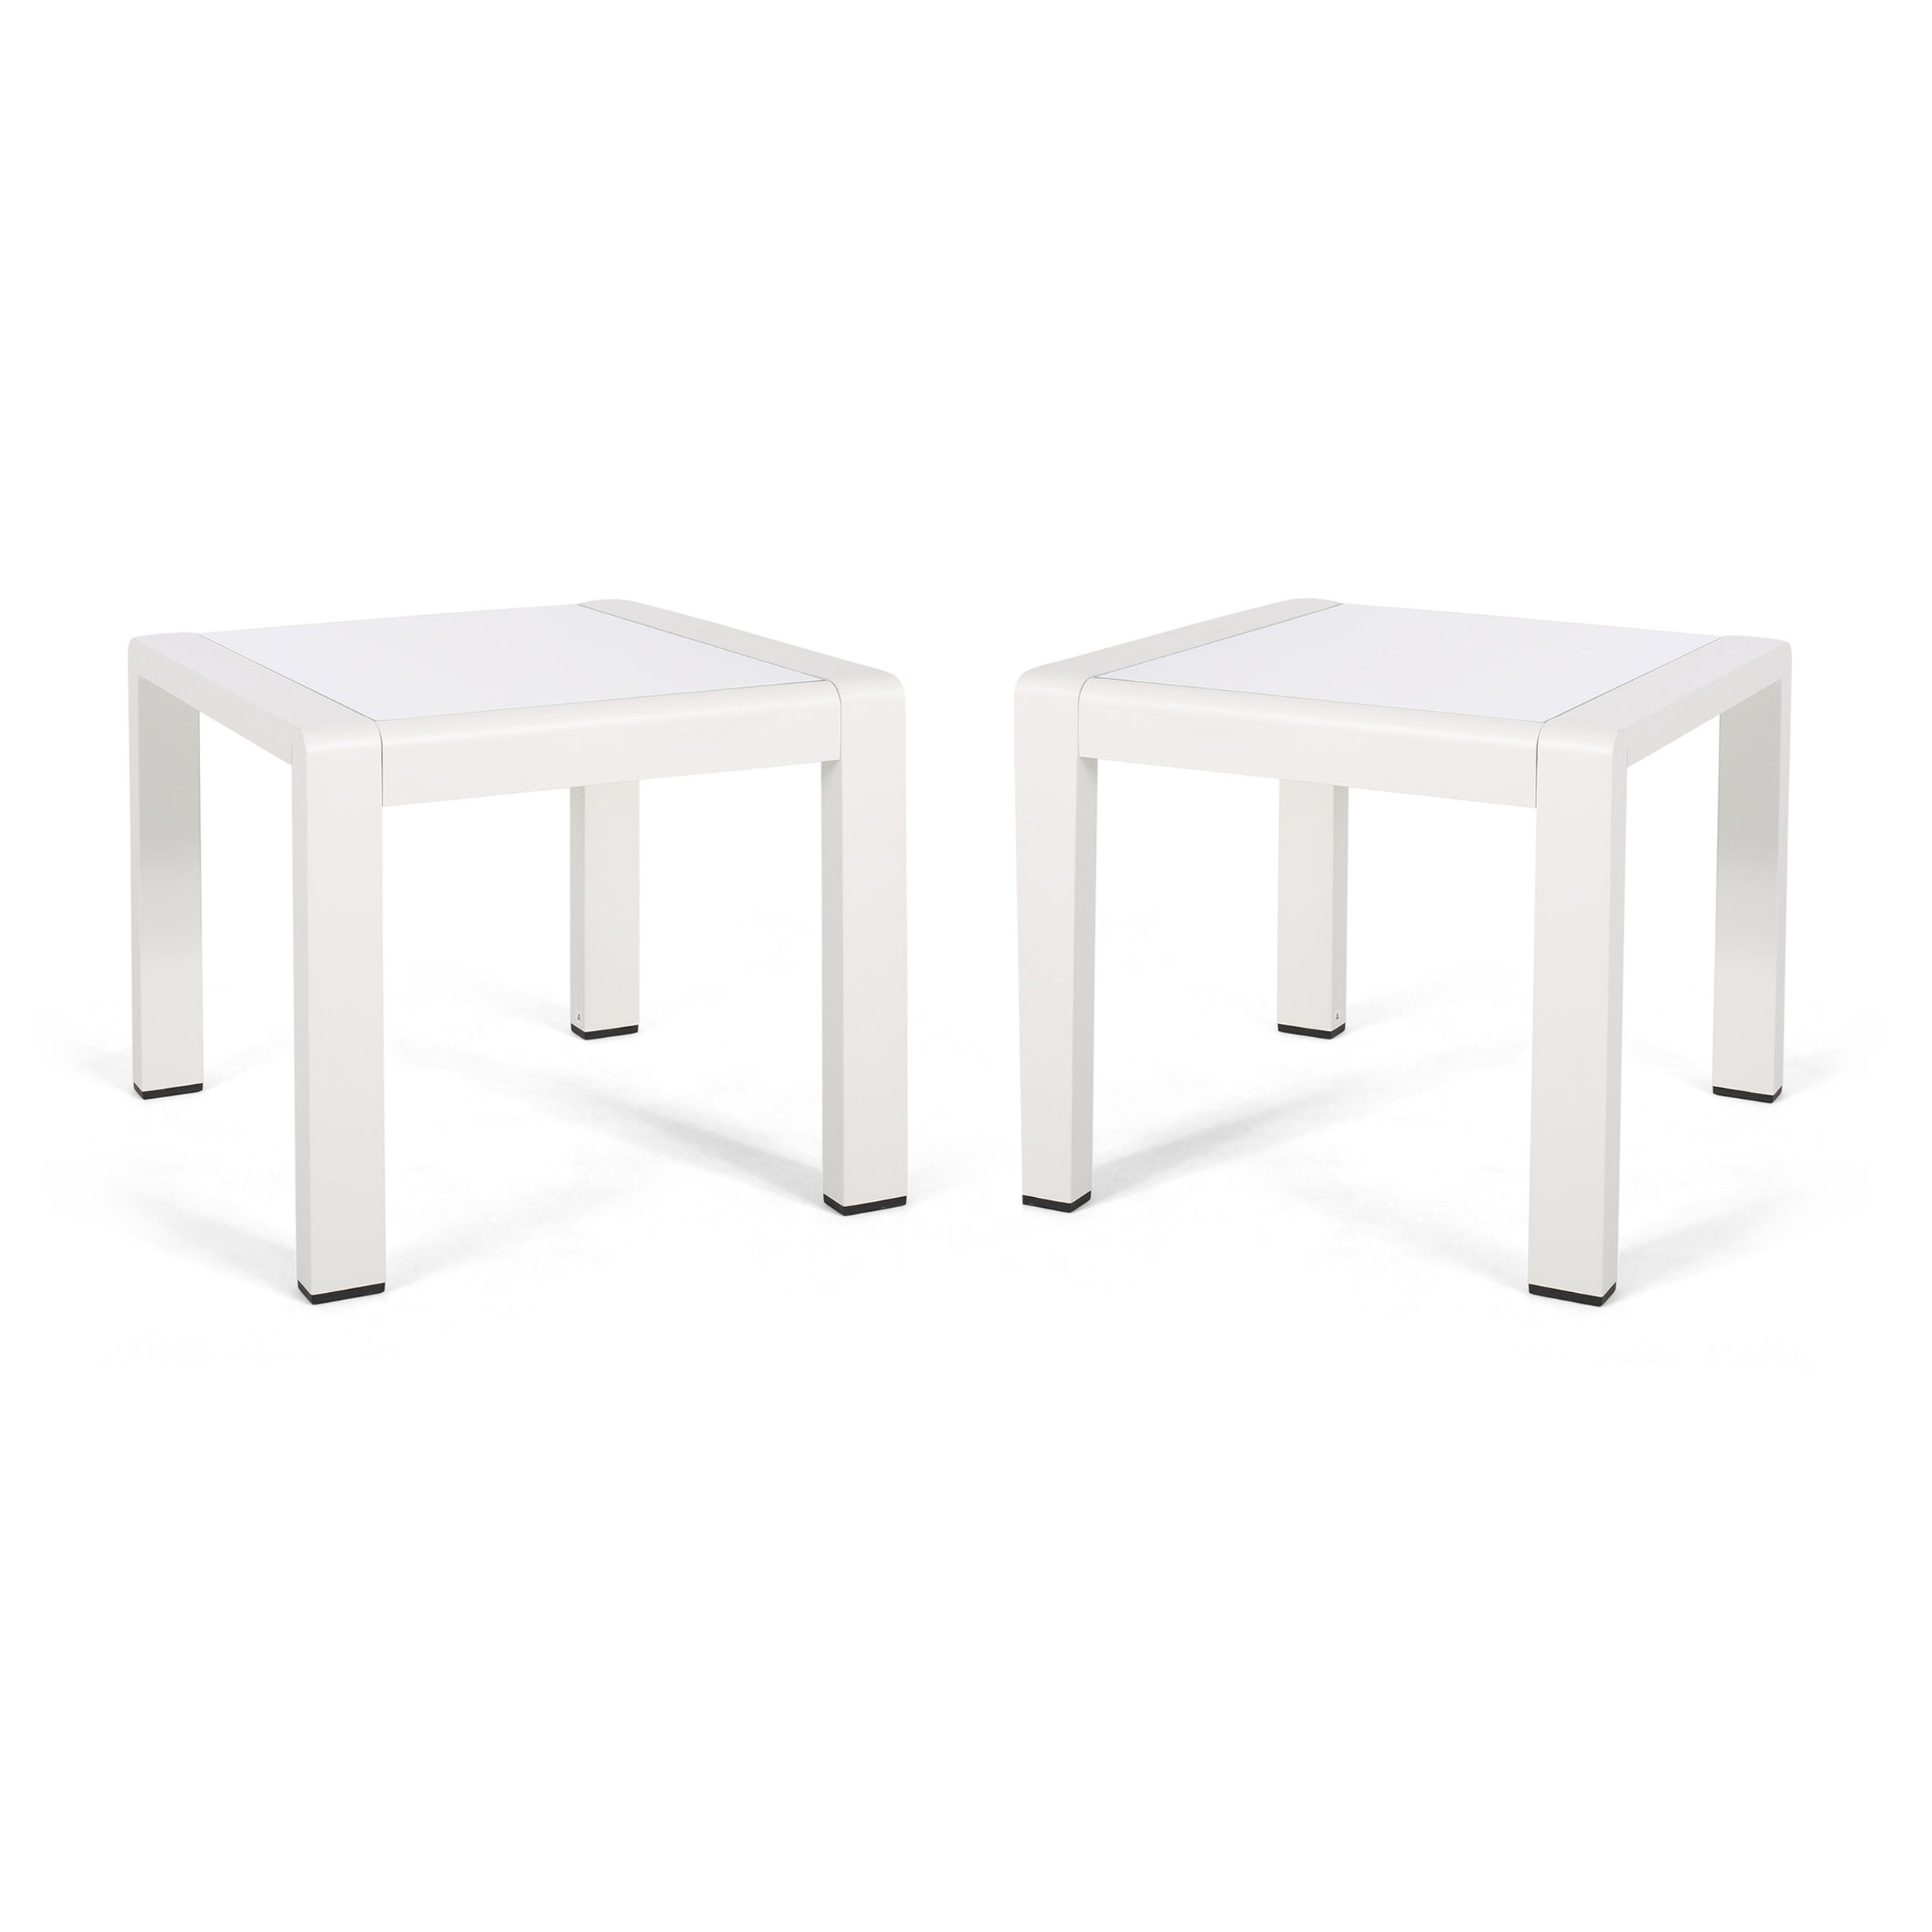 Bunny Coral Outdoor Aluminum Side Table (Set of 2) - image 1 of 8